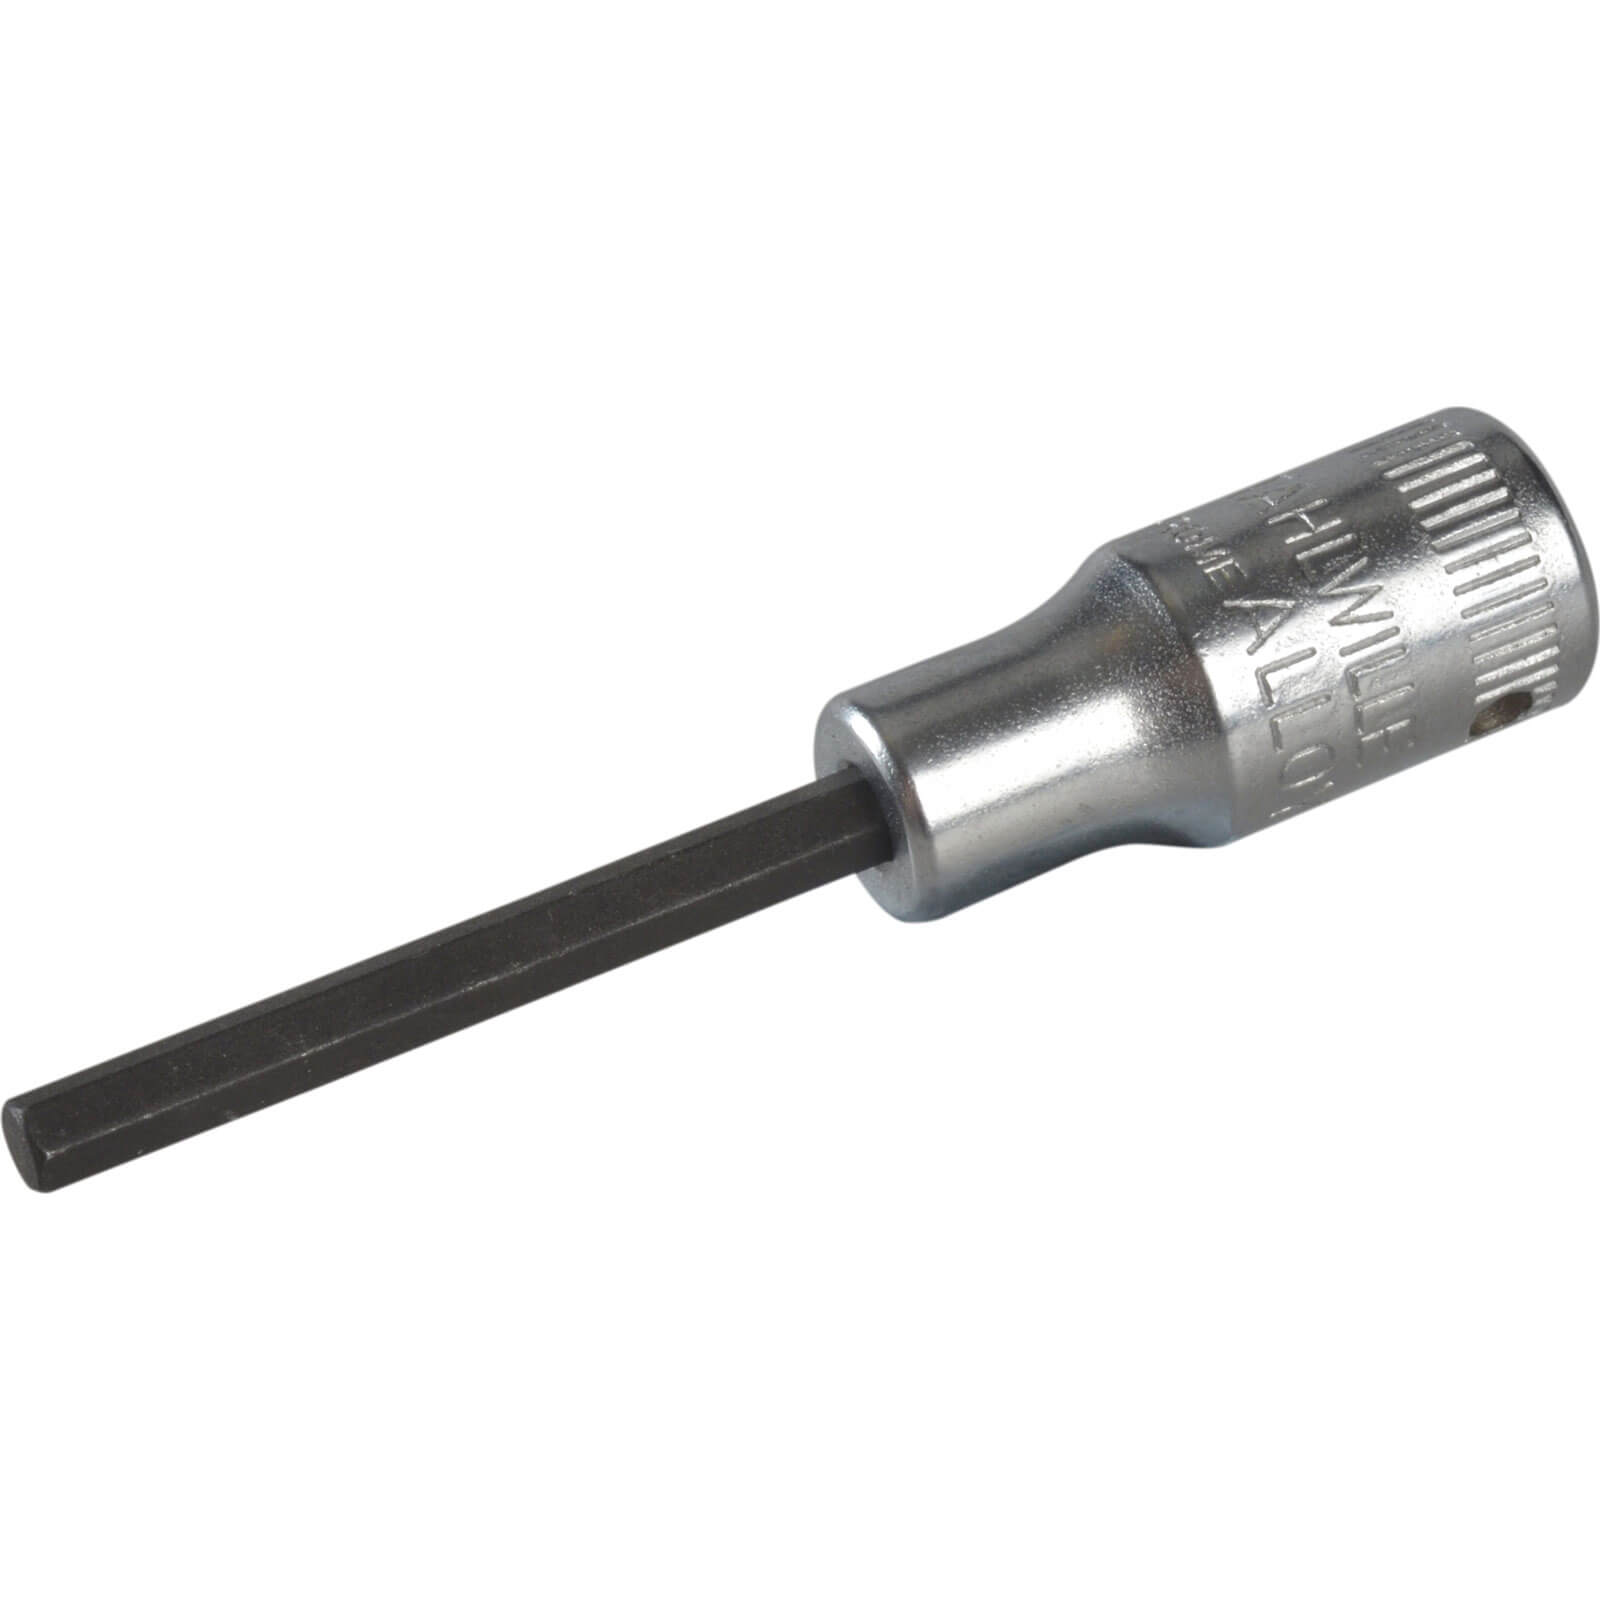 Image of Stahlwille 1/4" Drive Hexagon Socket Bit Imperial 1/4" 1/4"